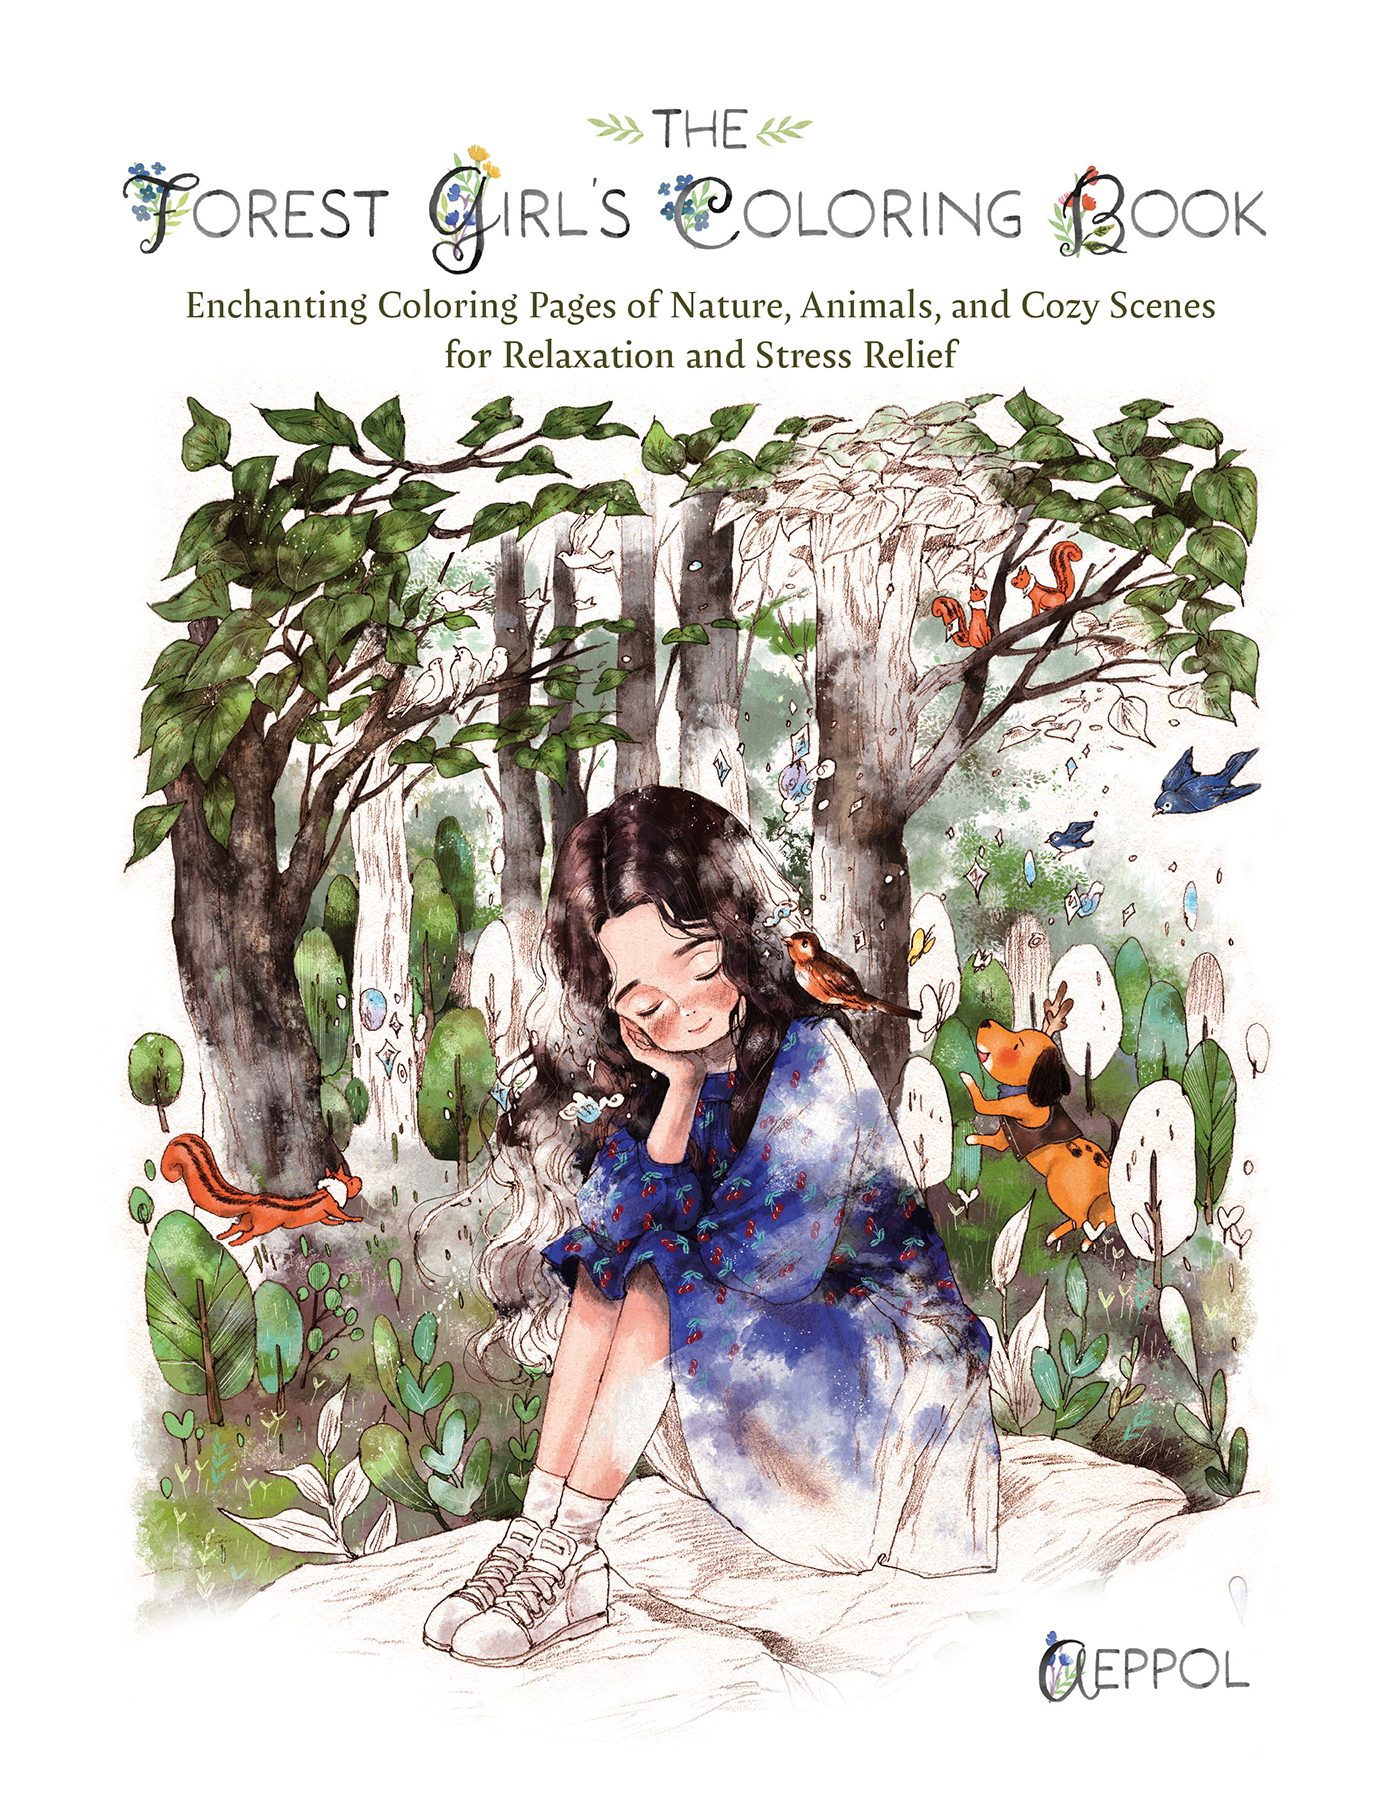 Forest Girl's Coloring Book